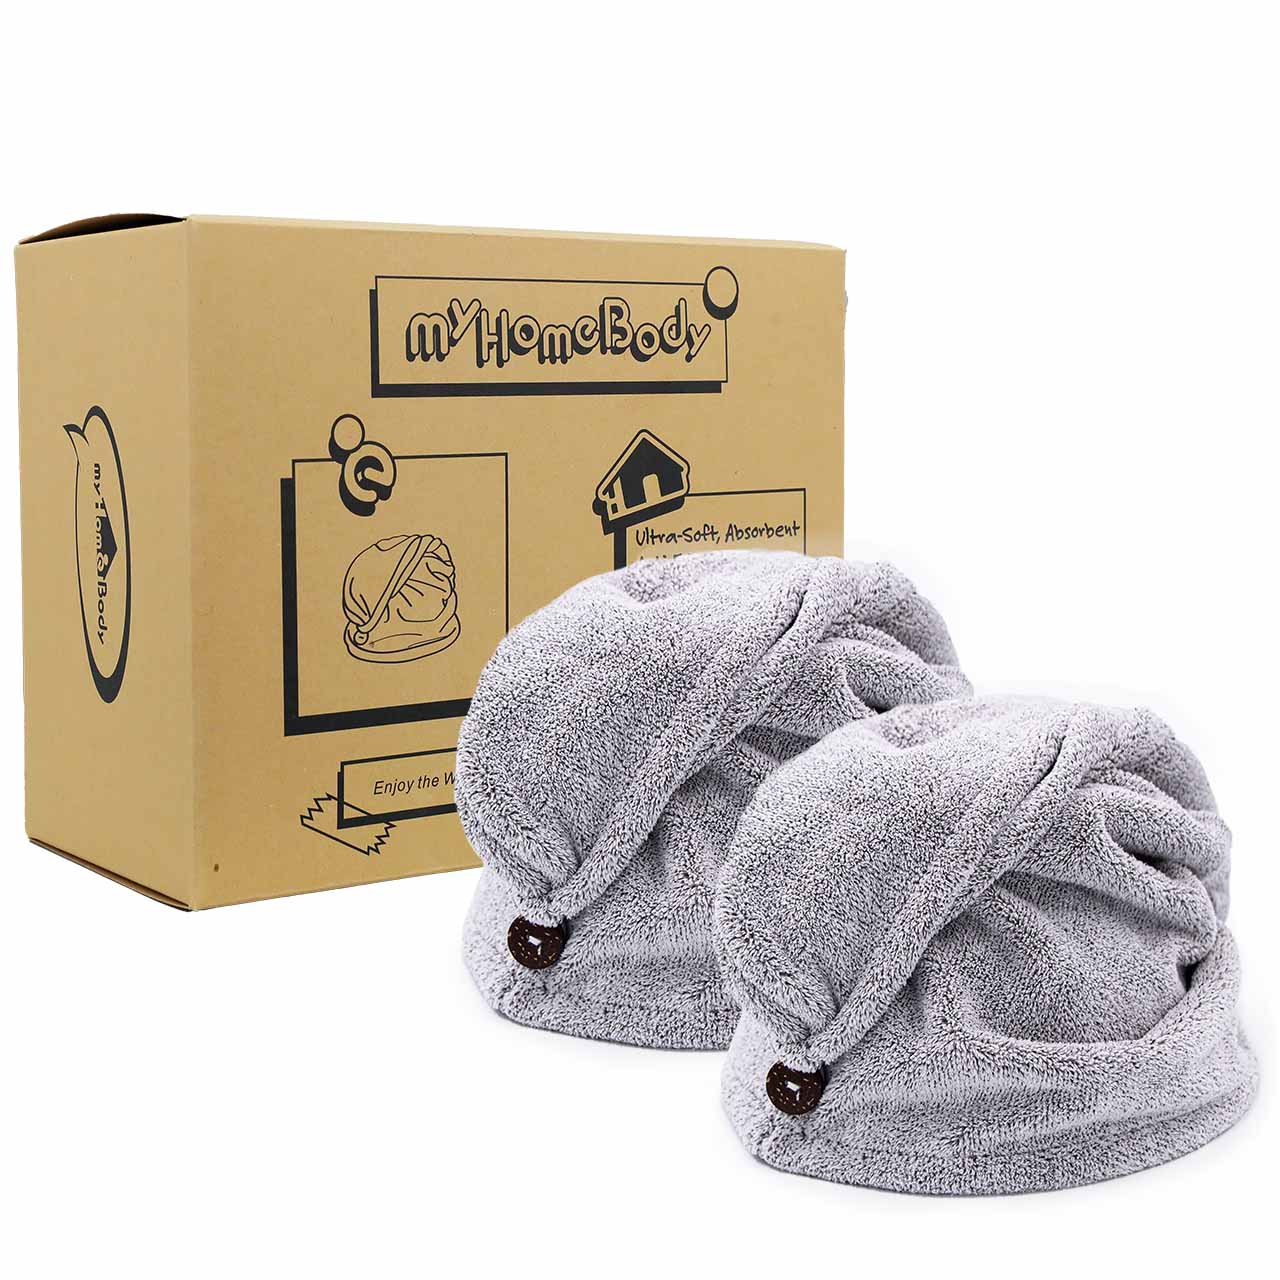 Ultra Soft and Absorbent Anti-Frizz Charcoal Fiber Hair Towel Wrap with Coconut Shell Button – 2 Pack - Gray